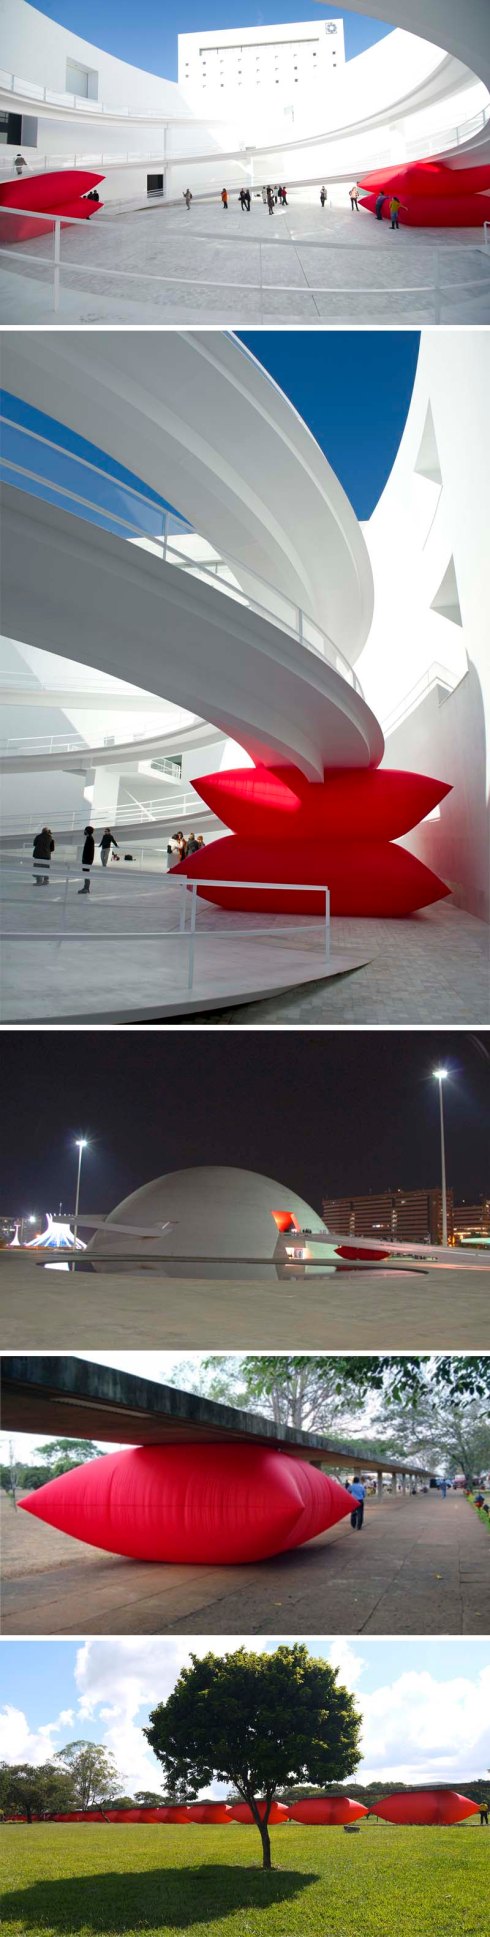 Inflatable art installation, AiOP NYC, Geraldo Zamproni's large red pillow, contemporary brazilian sculpture and installations